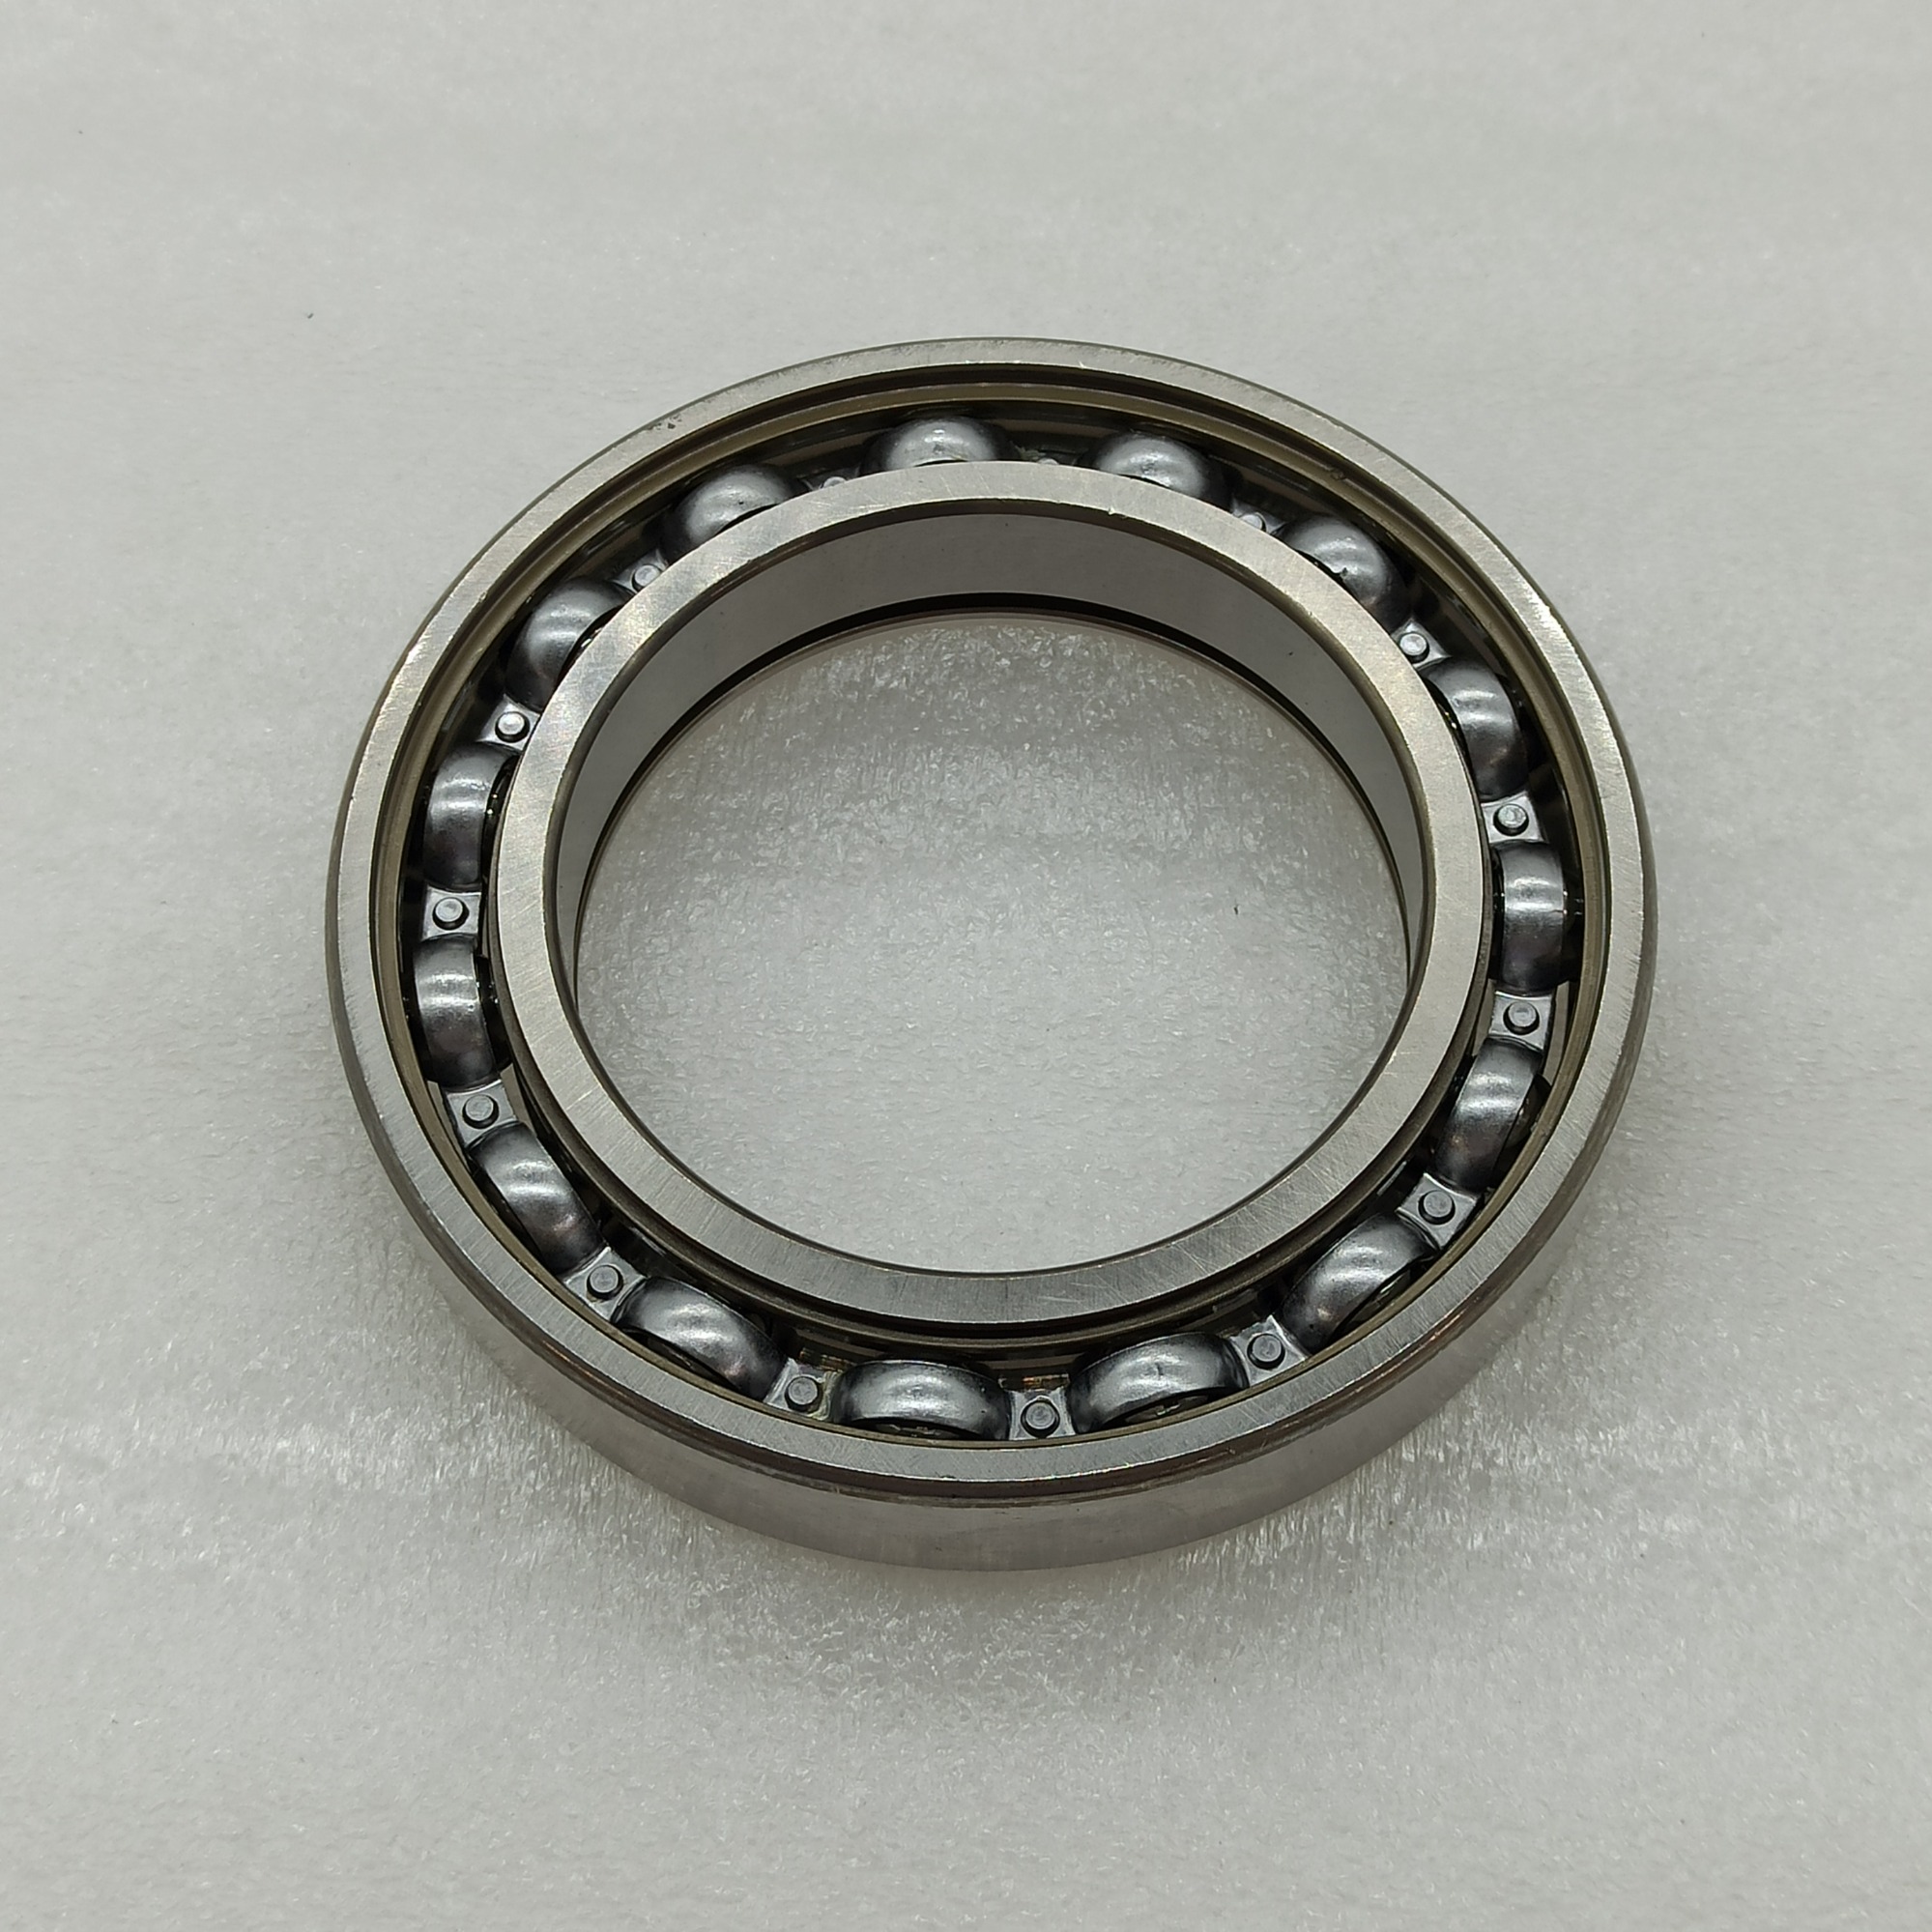 09A-0013-OEM 65TM-02 RE0F09A BEARING JF010E OF CVT Transmission for N issan Infiniti